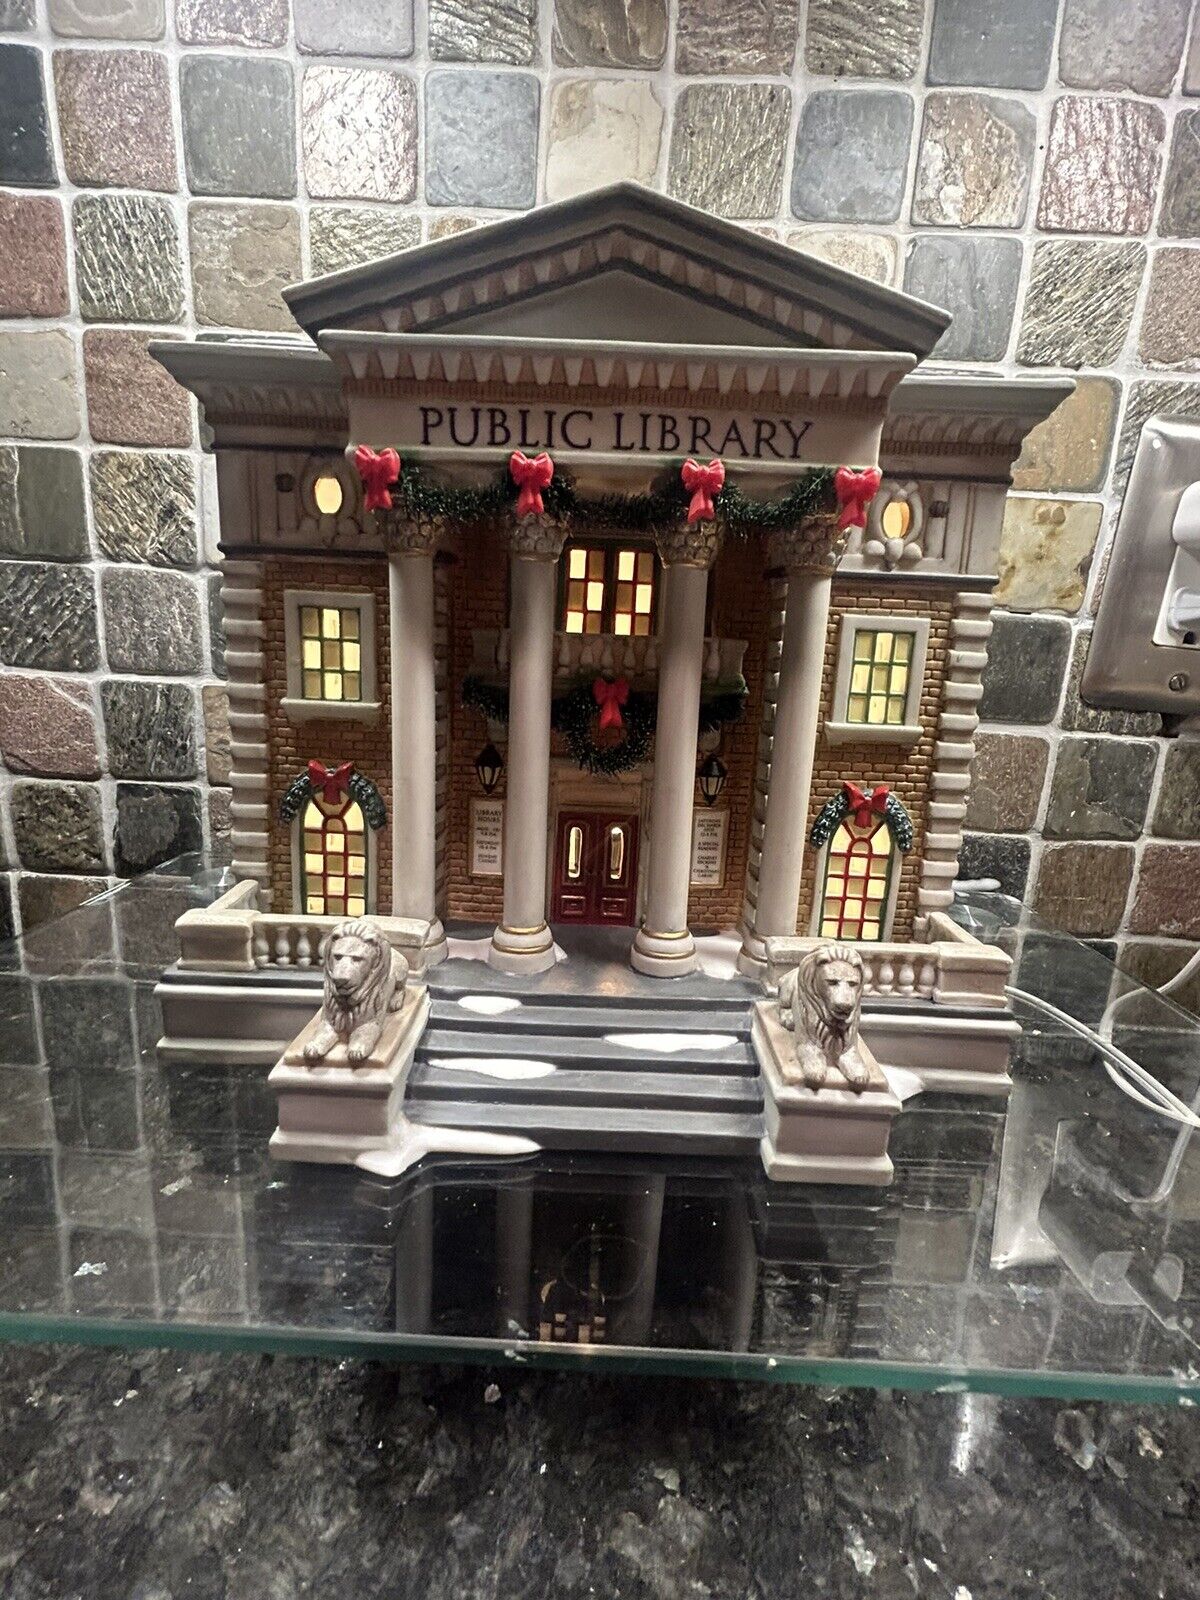 Dept 56 Christmas In The City Hudson Public Library Mint Condition.